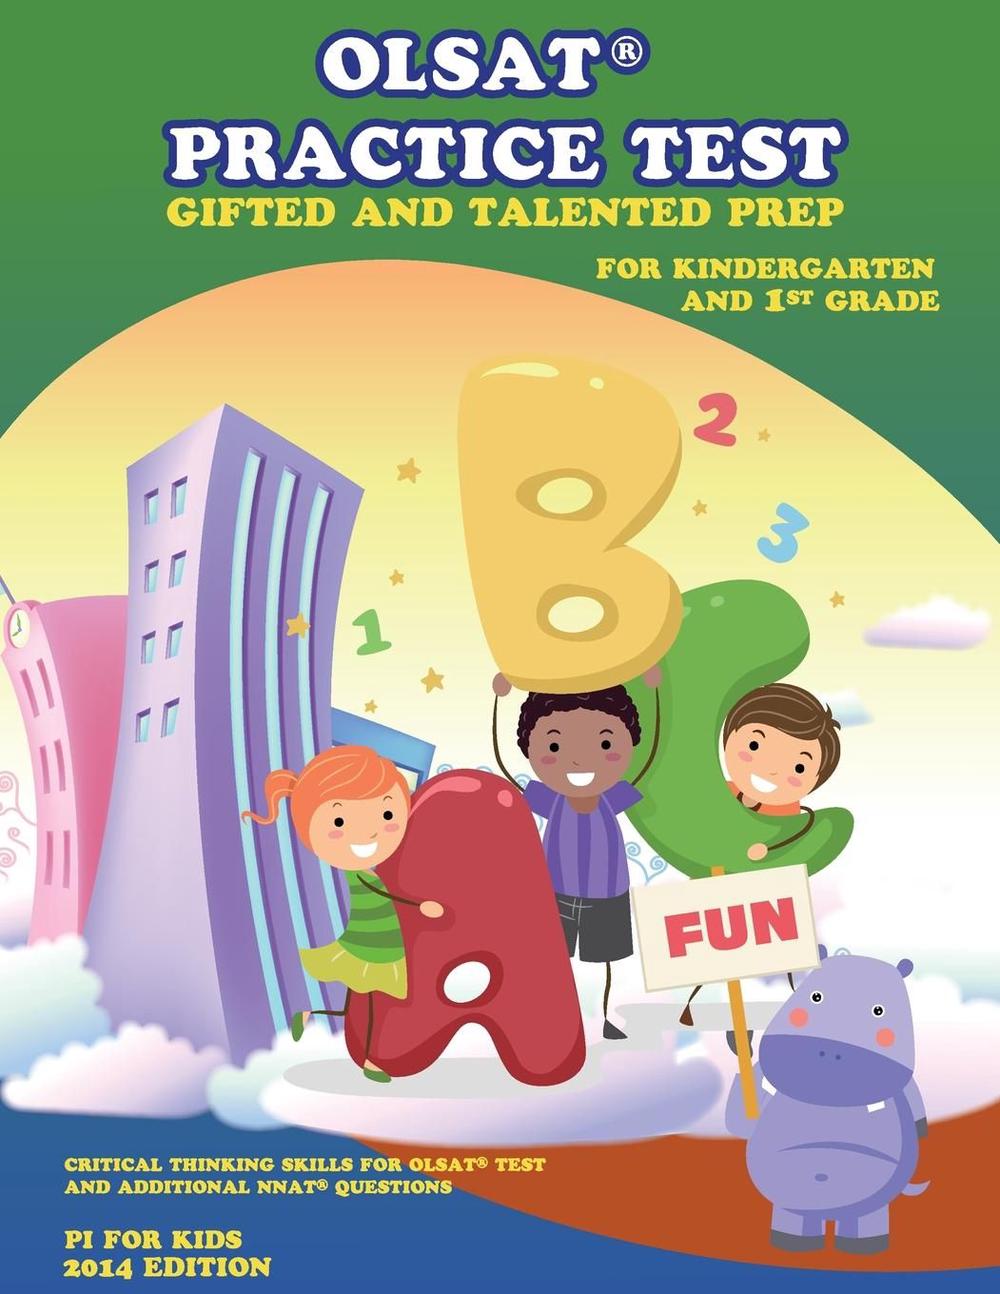 Olsat Practice Test Gifted and Talented Prep for